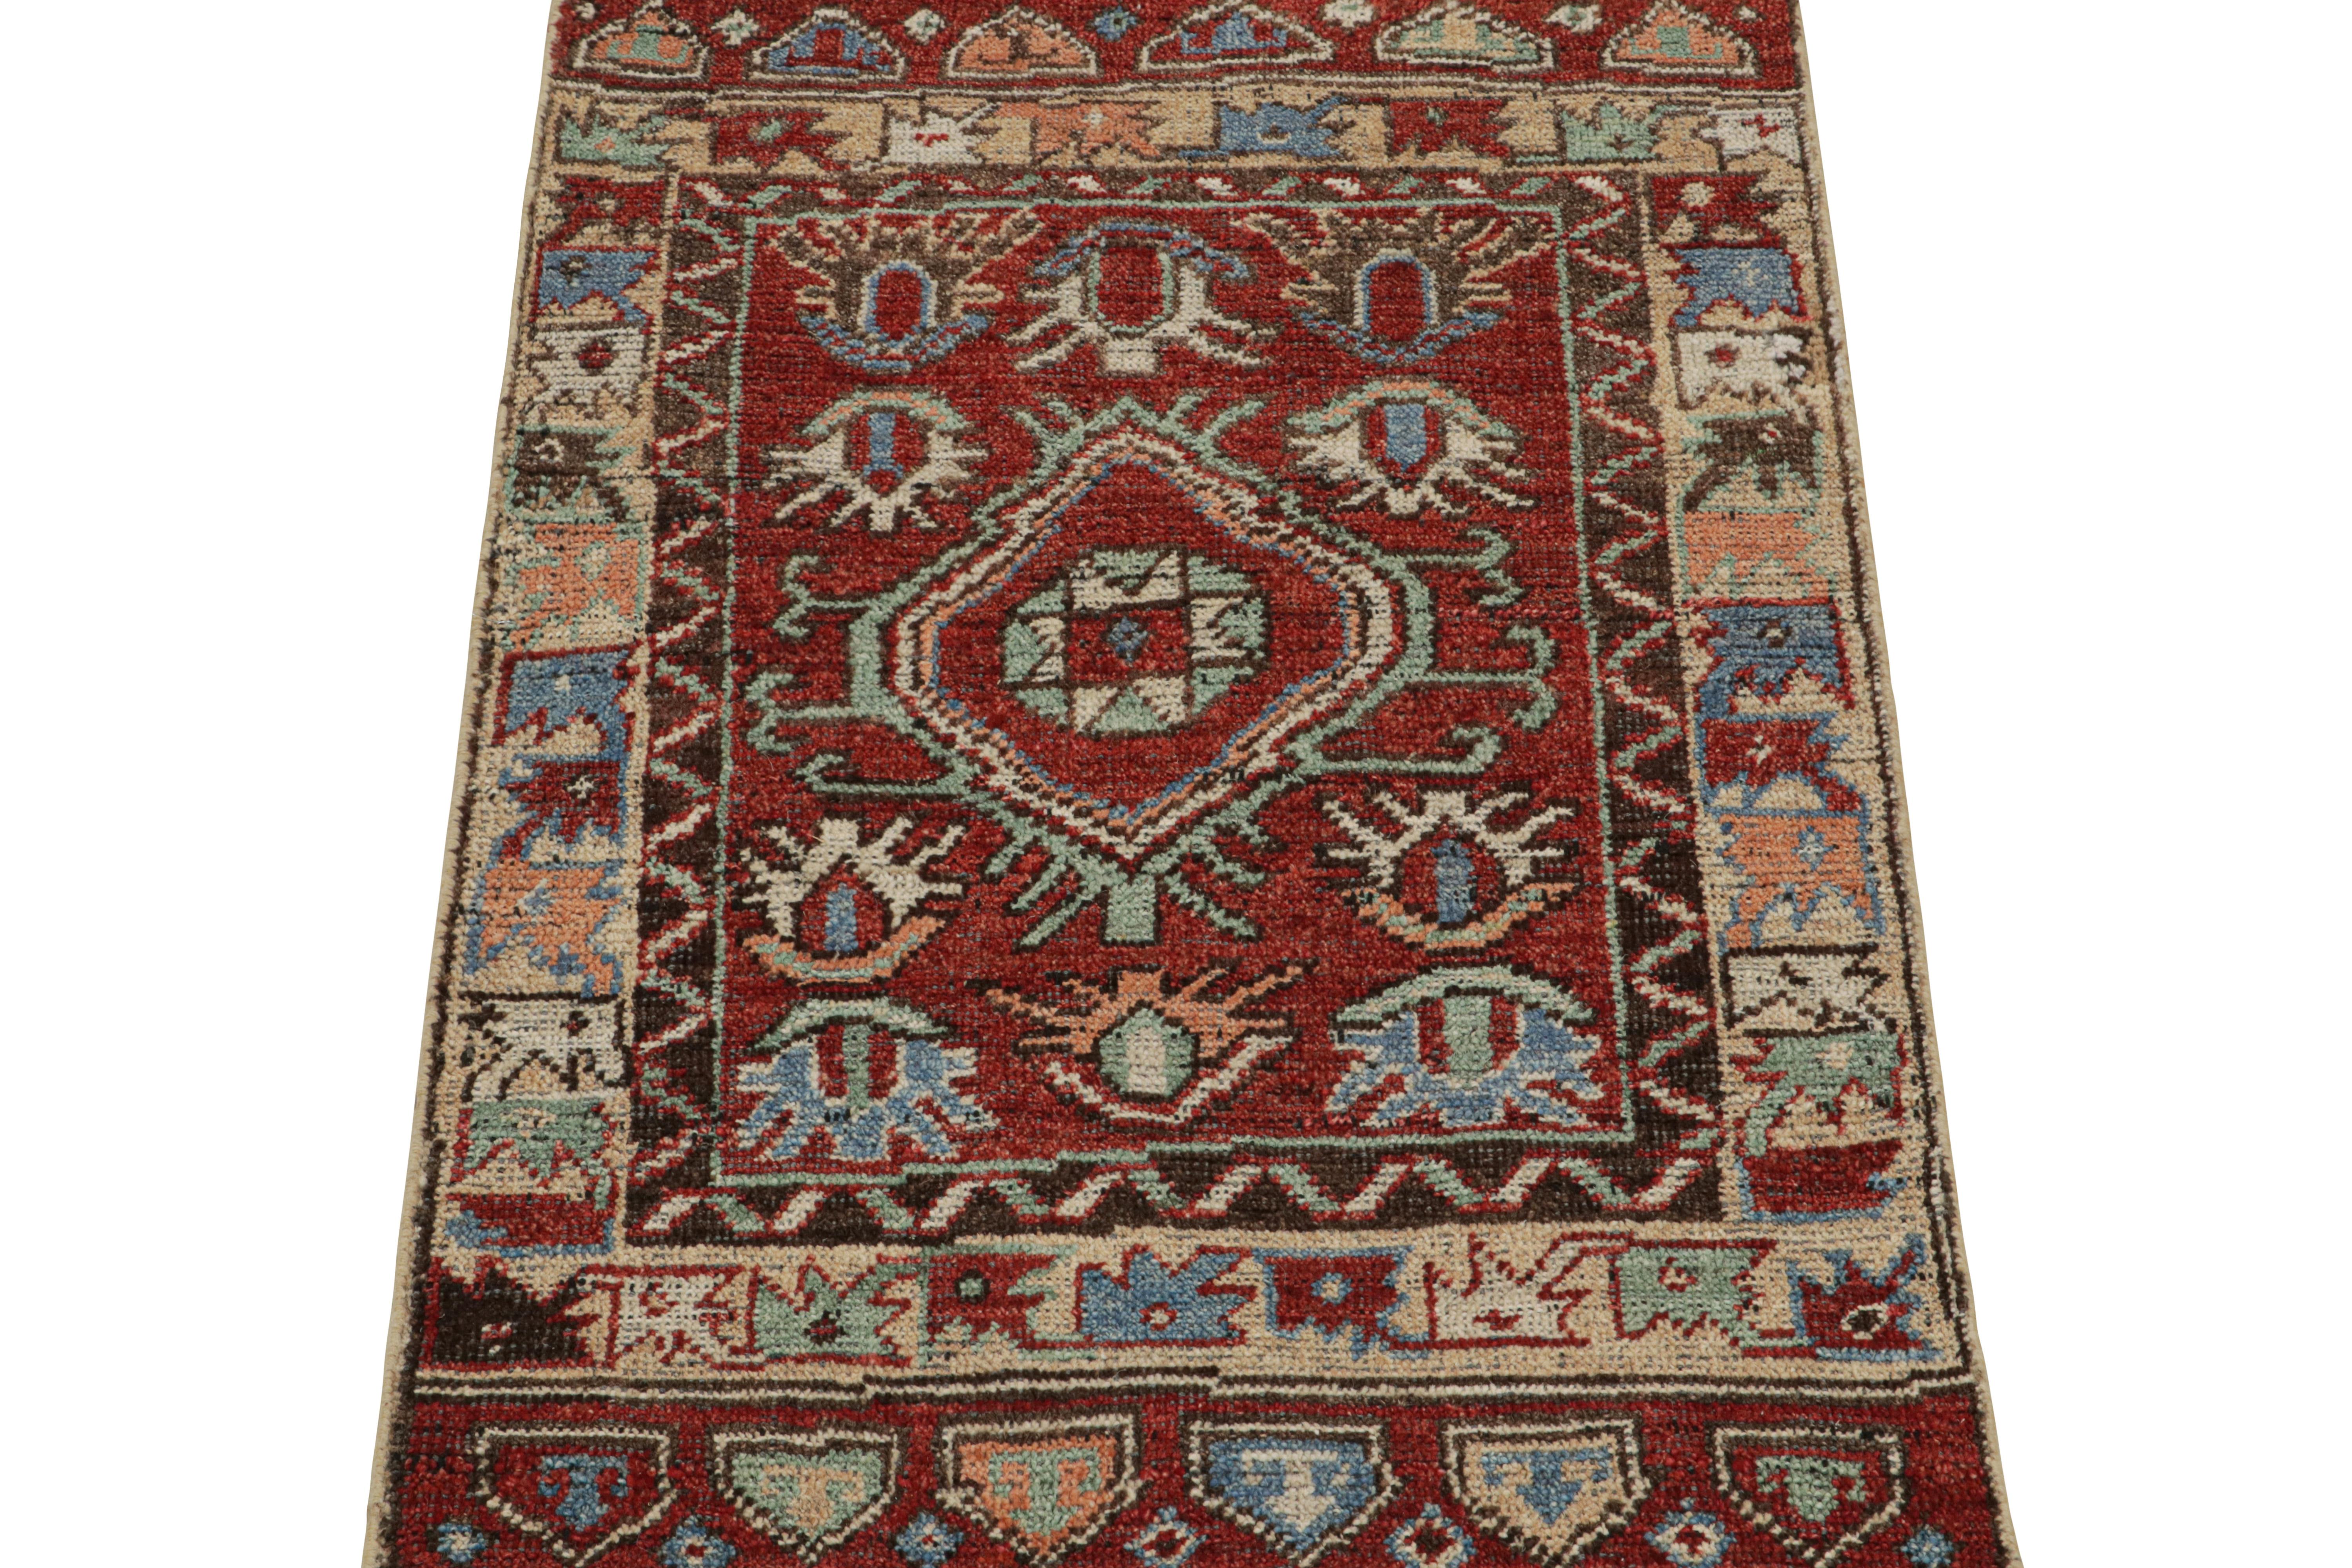 This 2x3 rug is a grand new entry to Rug & Kilim’s custom classics Burano collection. Hand-knotted in wool.

On the Design: 

This rug is inspired by antique tribal rugs & features primitivist geometric patterns in vibrant tones of red, blue, green